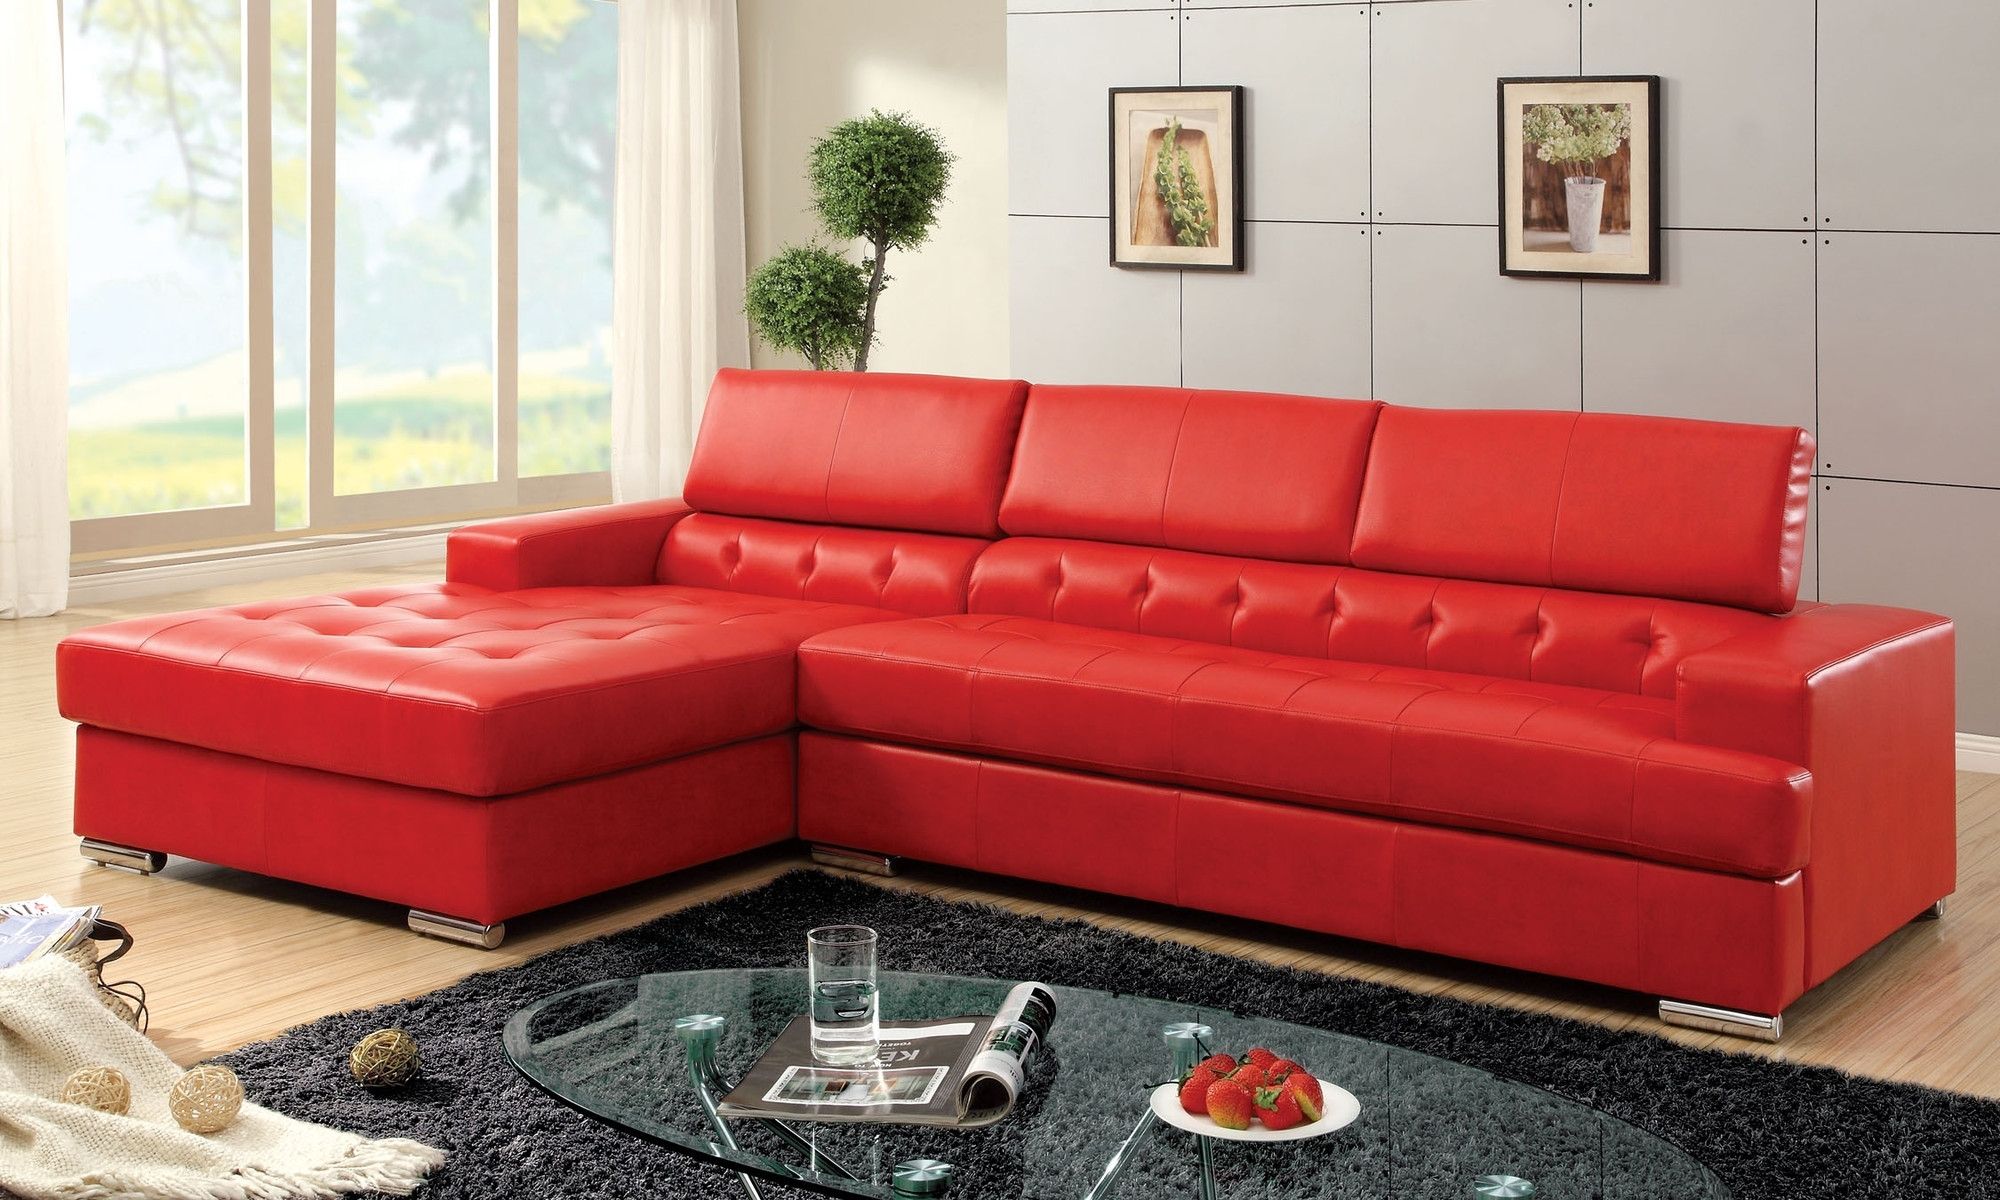 Furniture: Awesome Modern Stylish Living Room Interior Design With Intended For Red Leather Reclining Sofas And Loveseats (View 12 of 15)